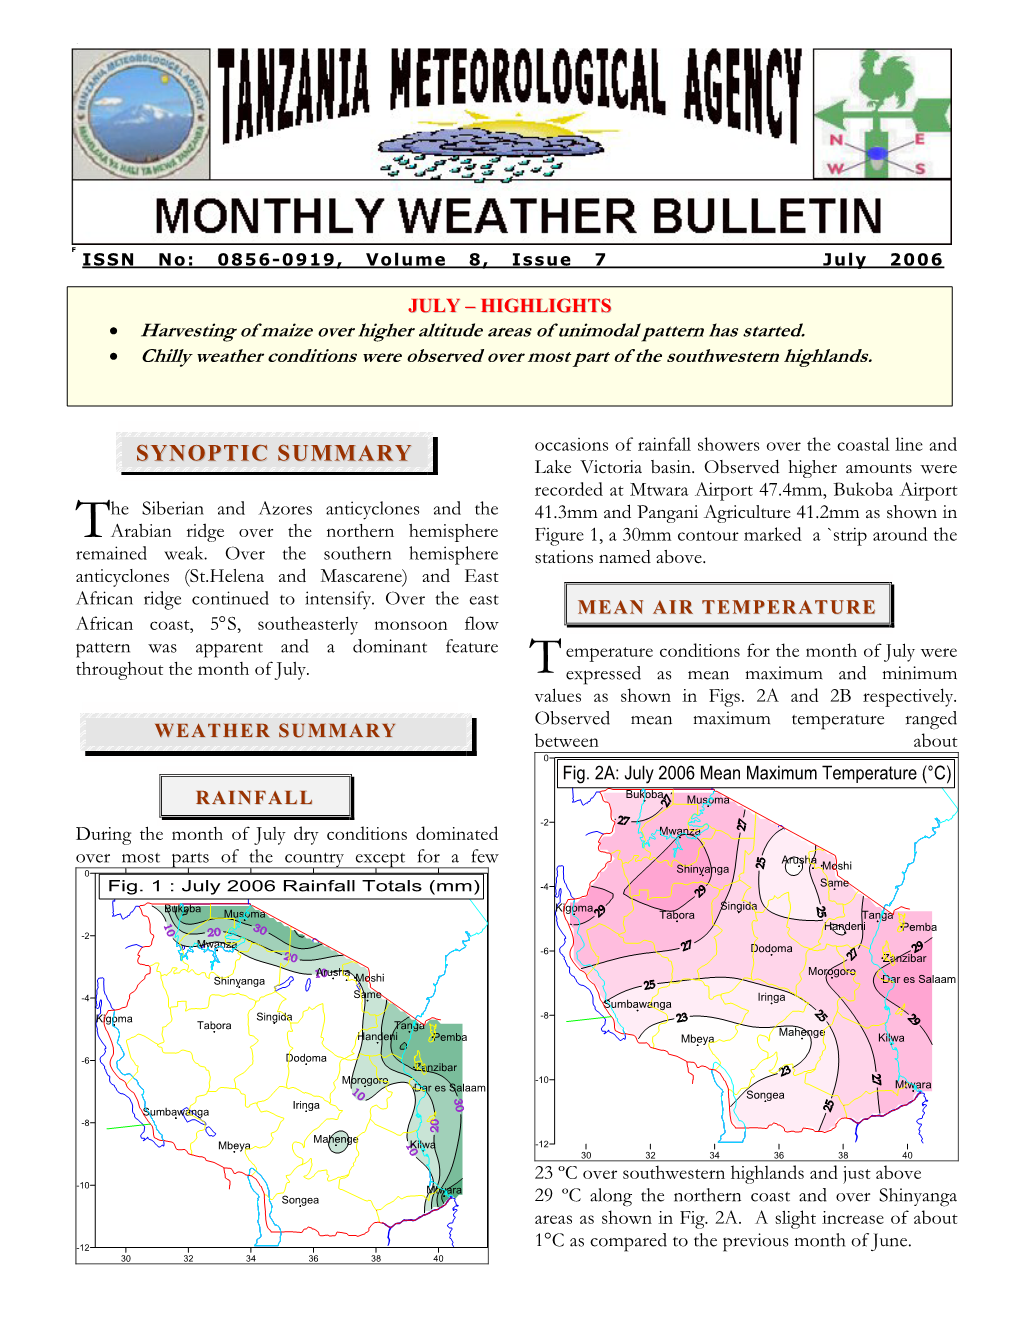 SYNOPTIC SUMMARY Occasions of Rainfall Showers Over the Coastal Line and Lake Victoria Basin